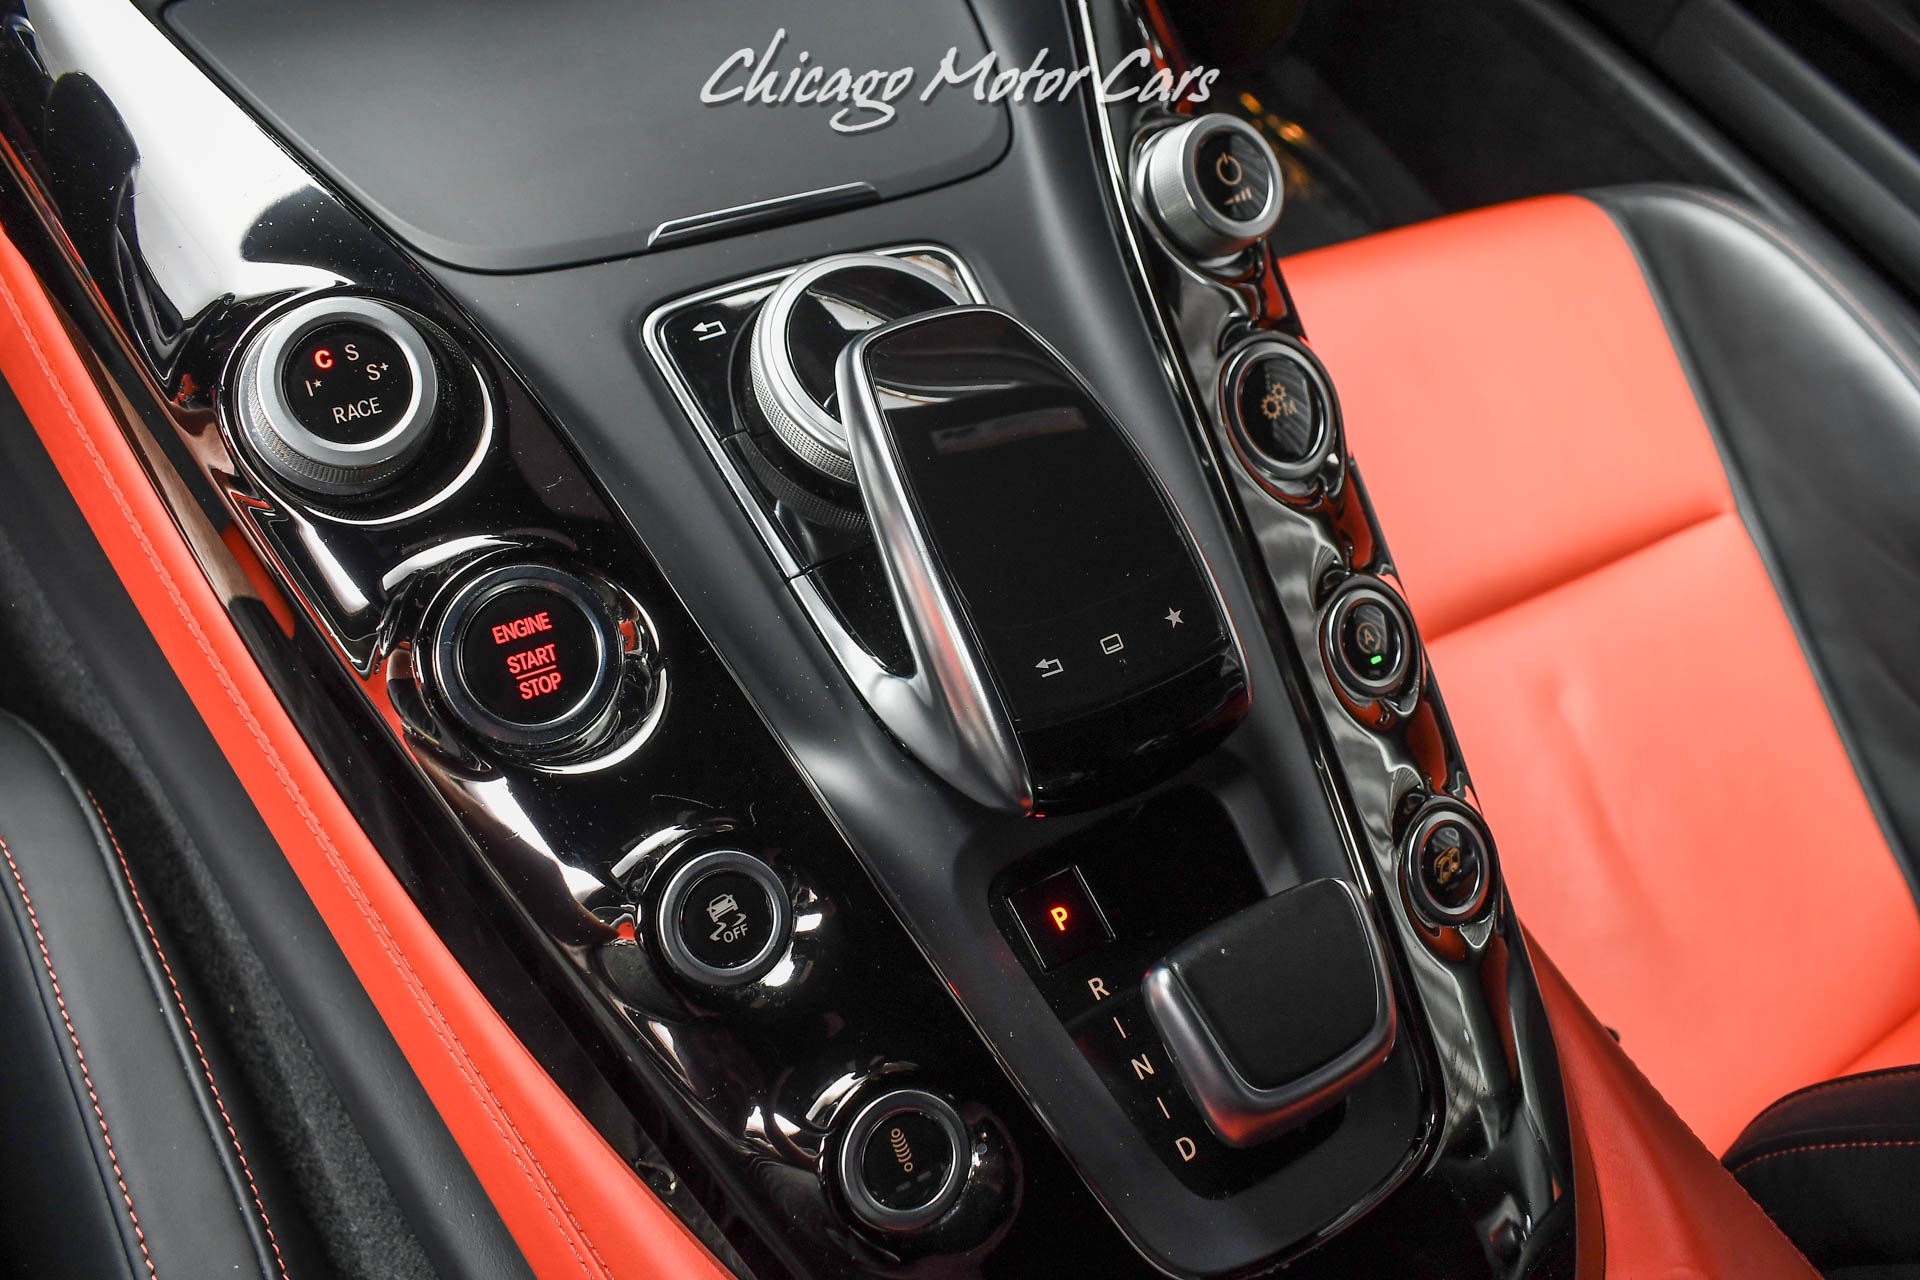 Used-2016-Mercedes-Benz-AMG-GTS-Coupe-Exlusive-Interior-Package-AMG-Black-Diamond-Trim-HOT-Spec-Front-PPF